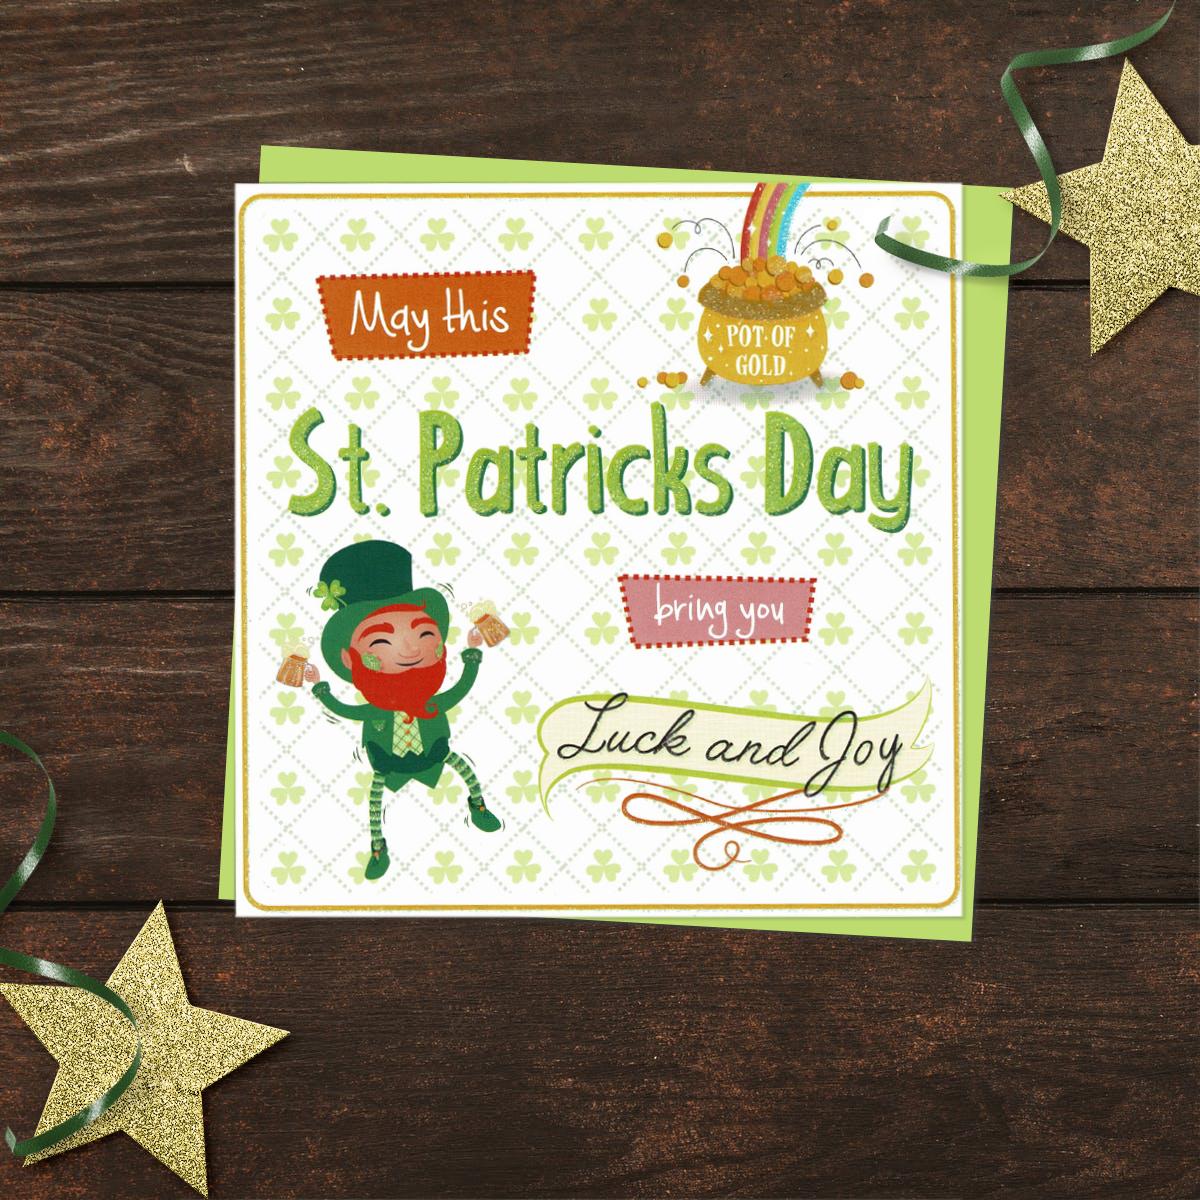 May This St. Patrick's Day Bring You Luck And Joy' Card Showing a Leprechaun And A Pot Of Gold! With Lime Green Envelope